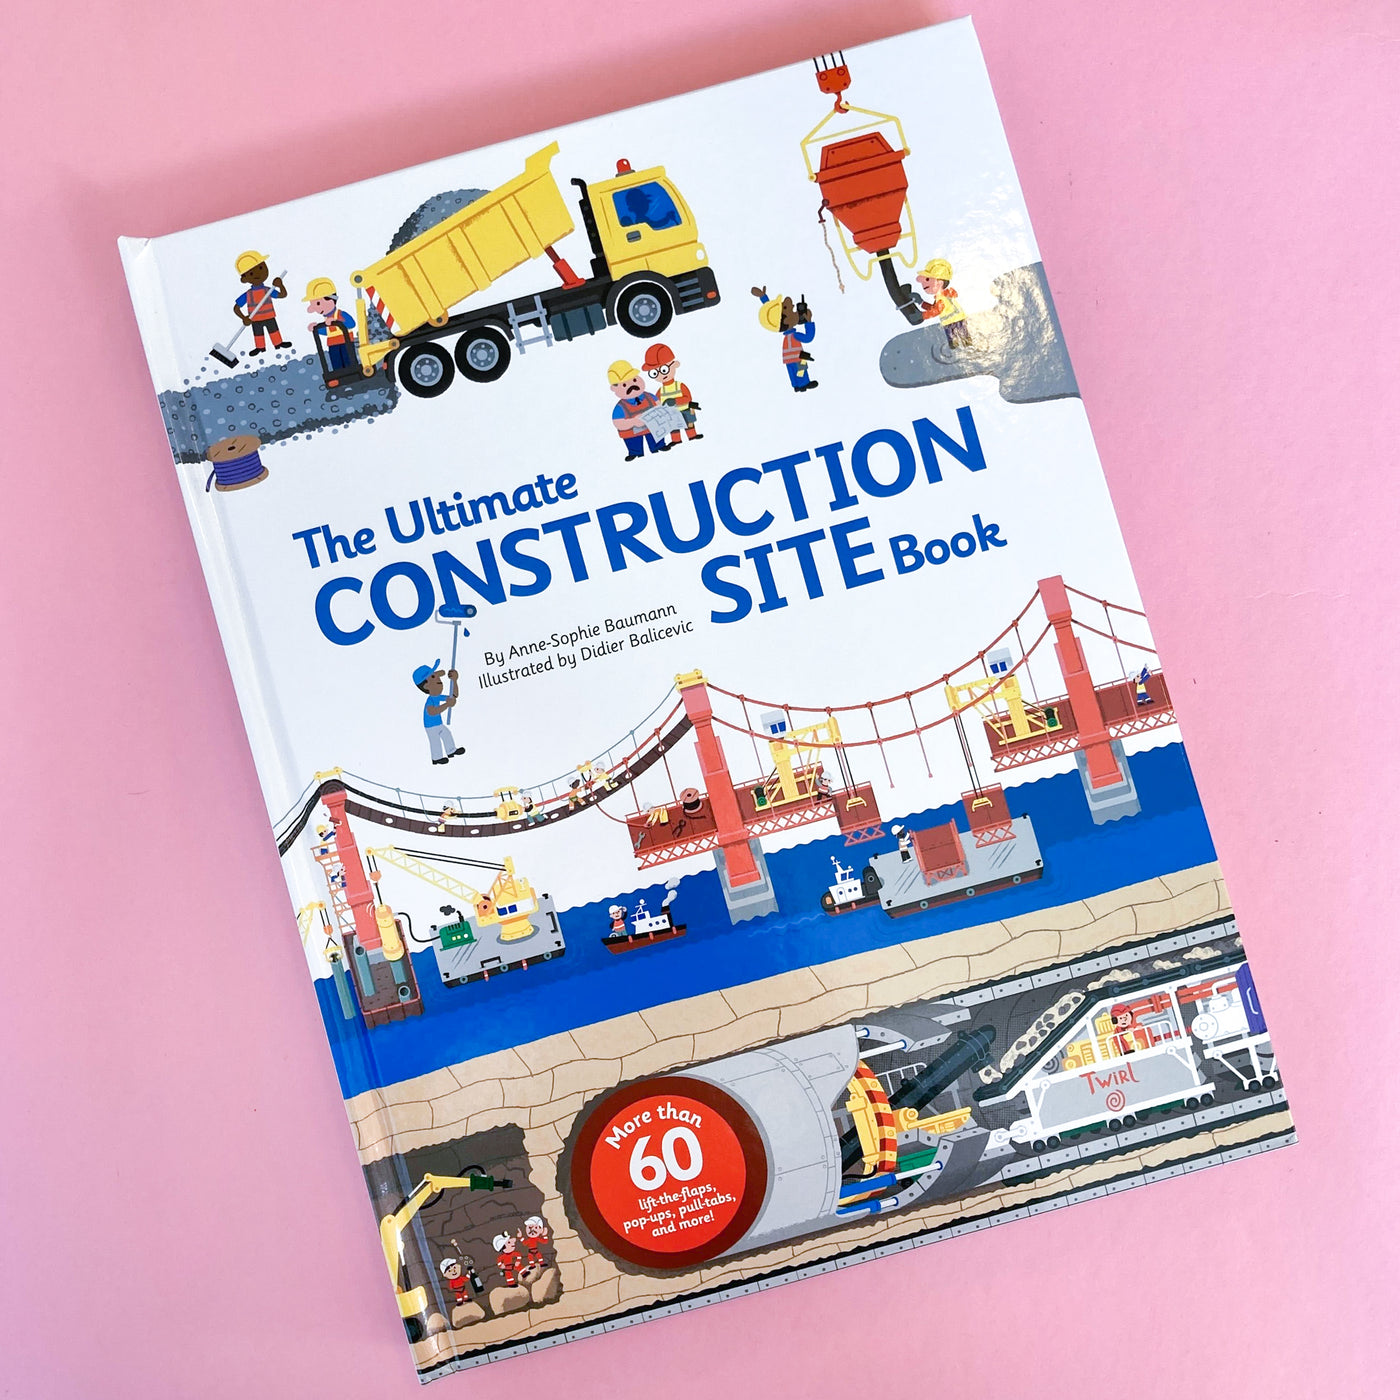 The Ultimate Construction Site Book: From Around the World by Anne-Sophie Baumann and Didier Balicevic